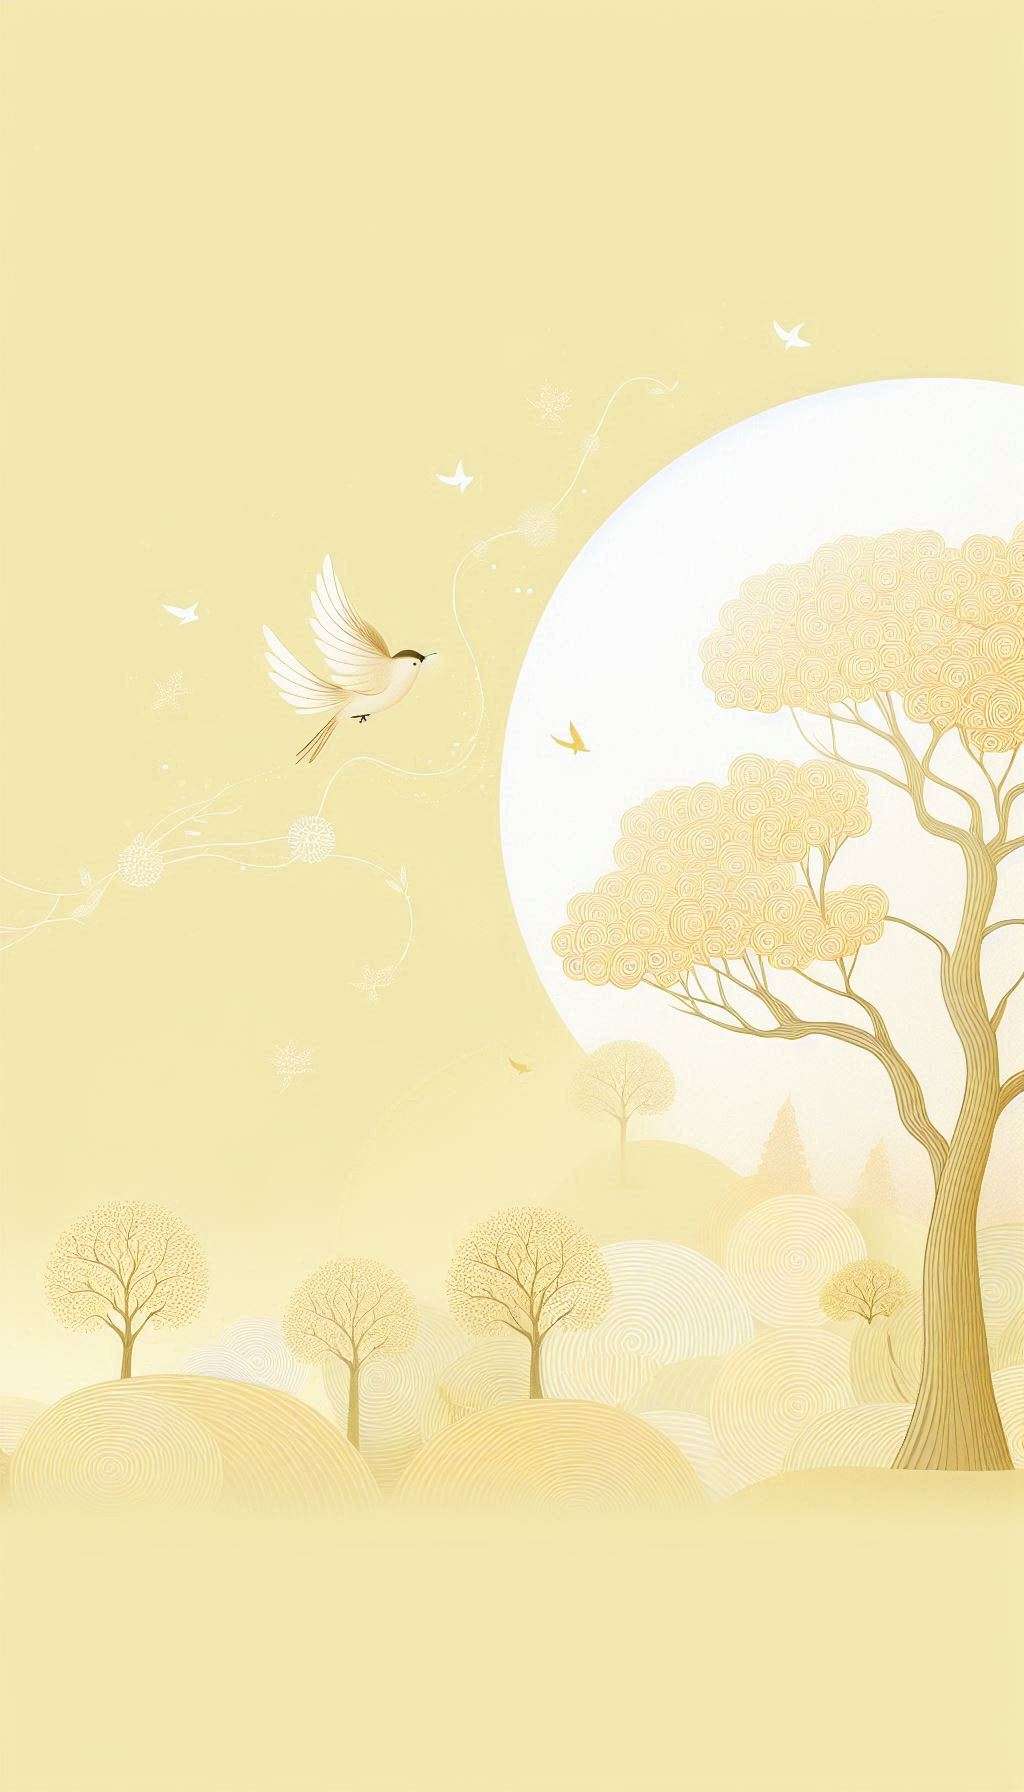 Download Free light yellow background with tree wallpaper for websites, slideshows, and designs | royalty-free and unlimited use.